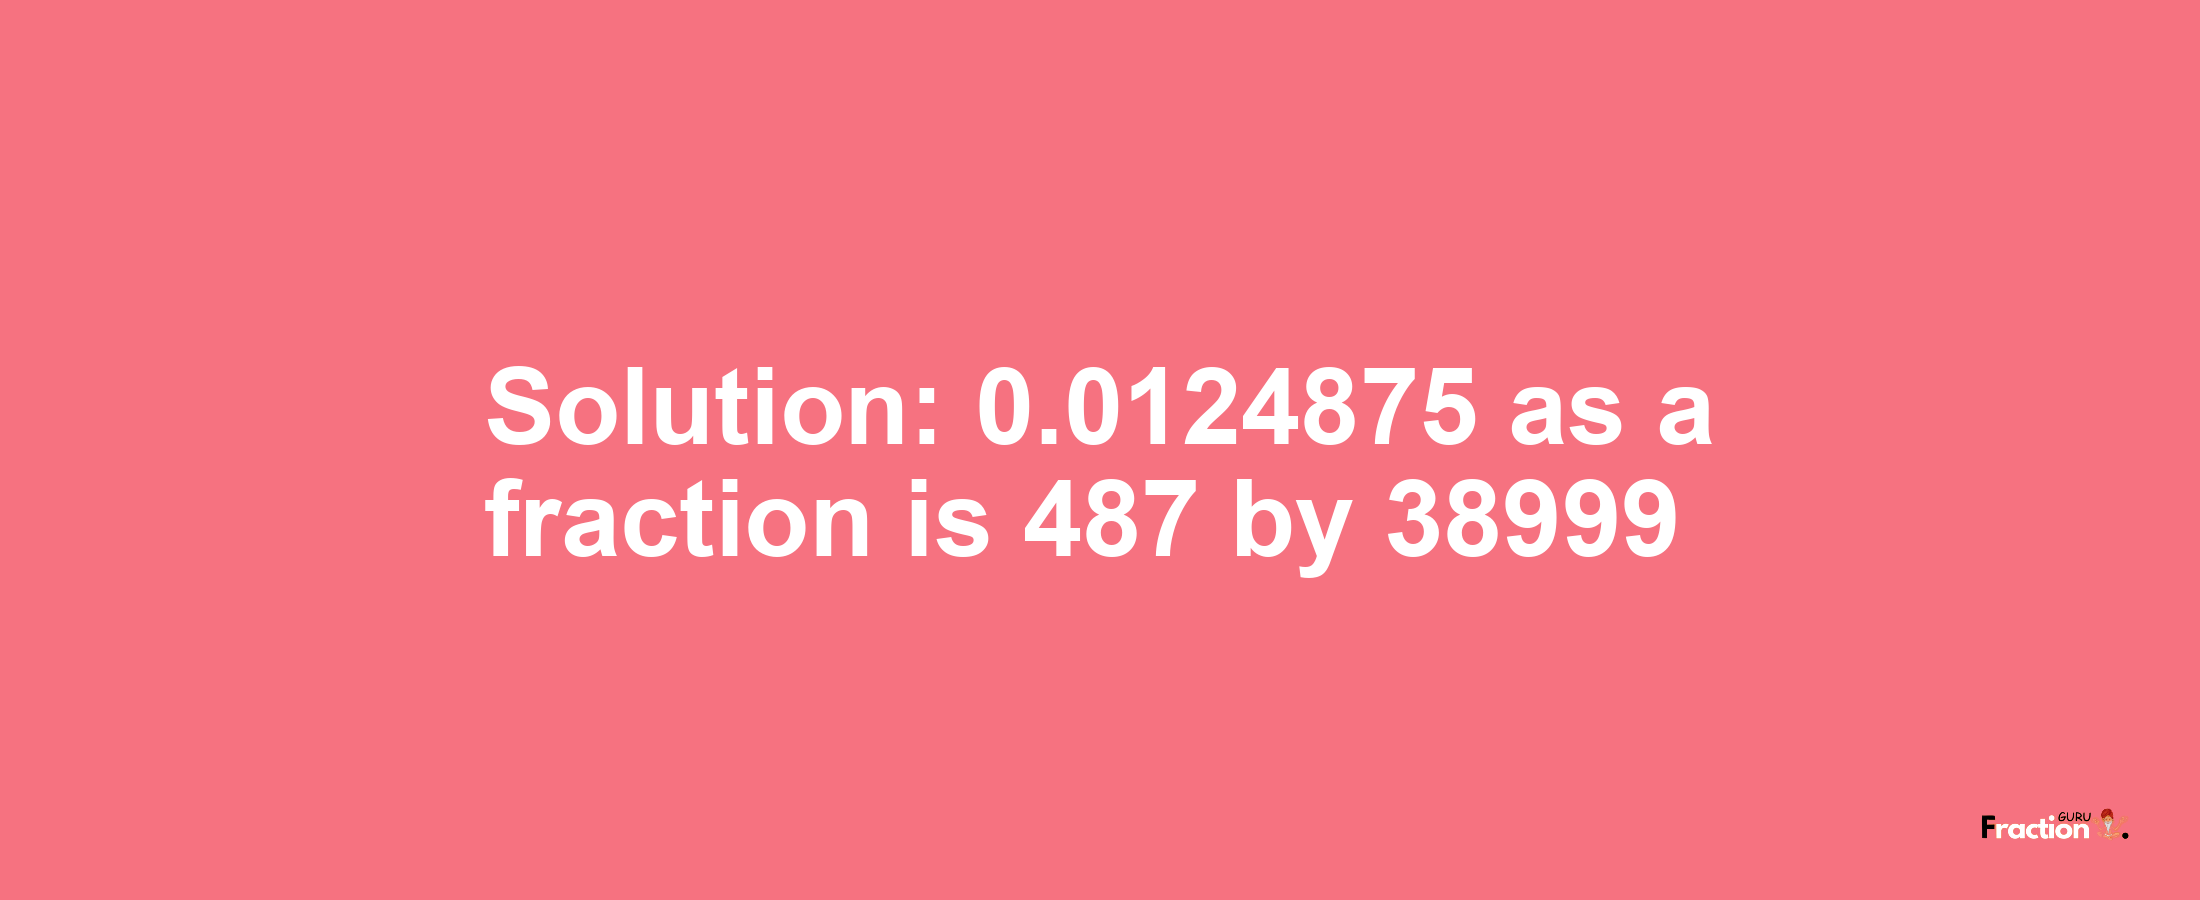 Solution:0.0124875 as a fraction is 487/38999